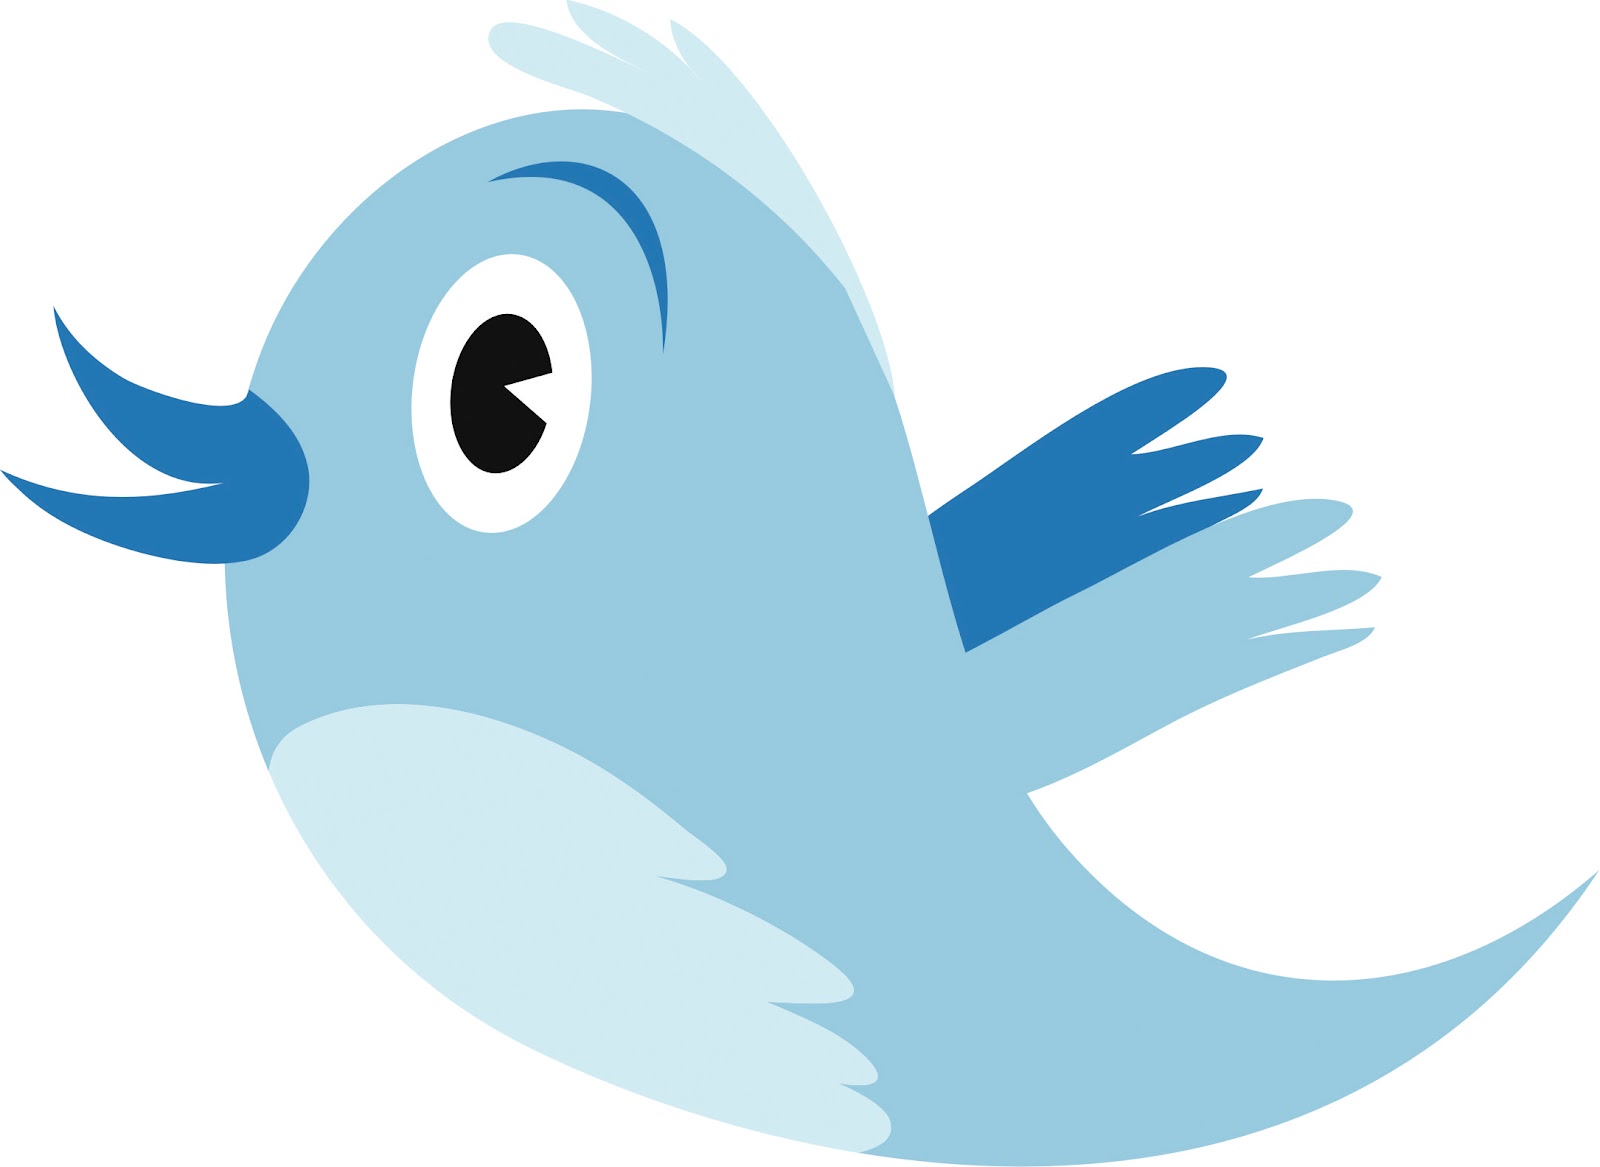 Free Bird Vector Png, Download Free Bird Vector Png png images, Free